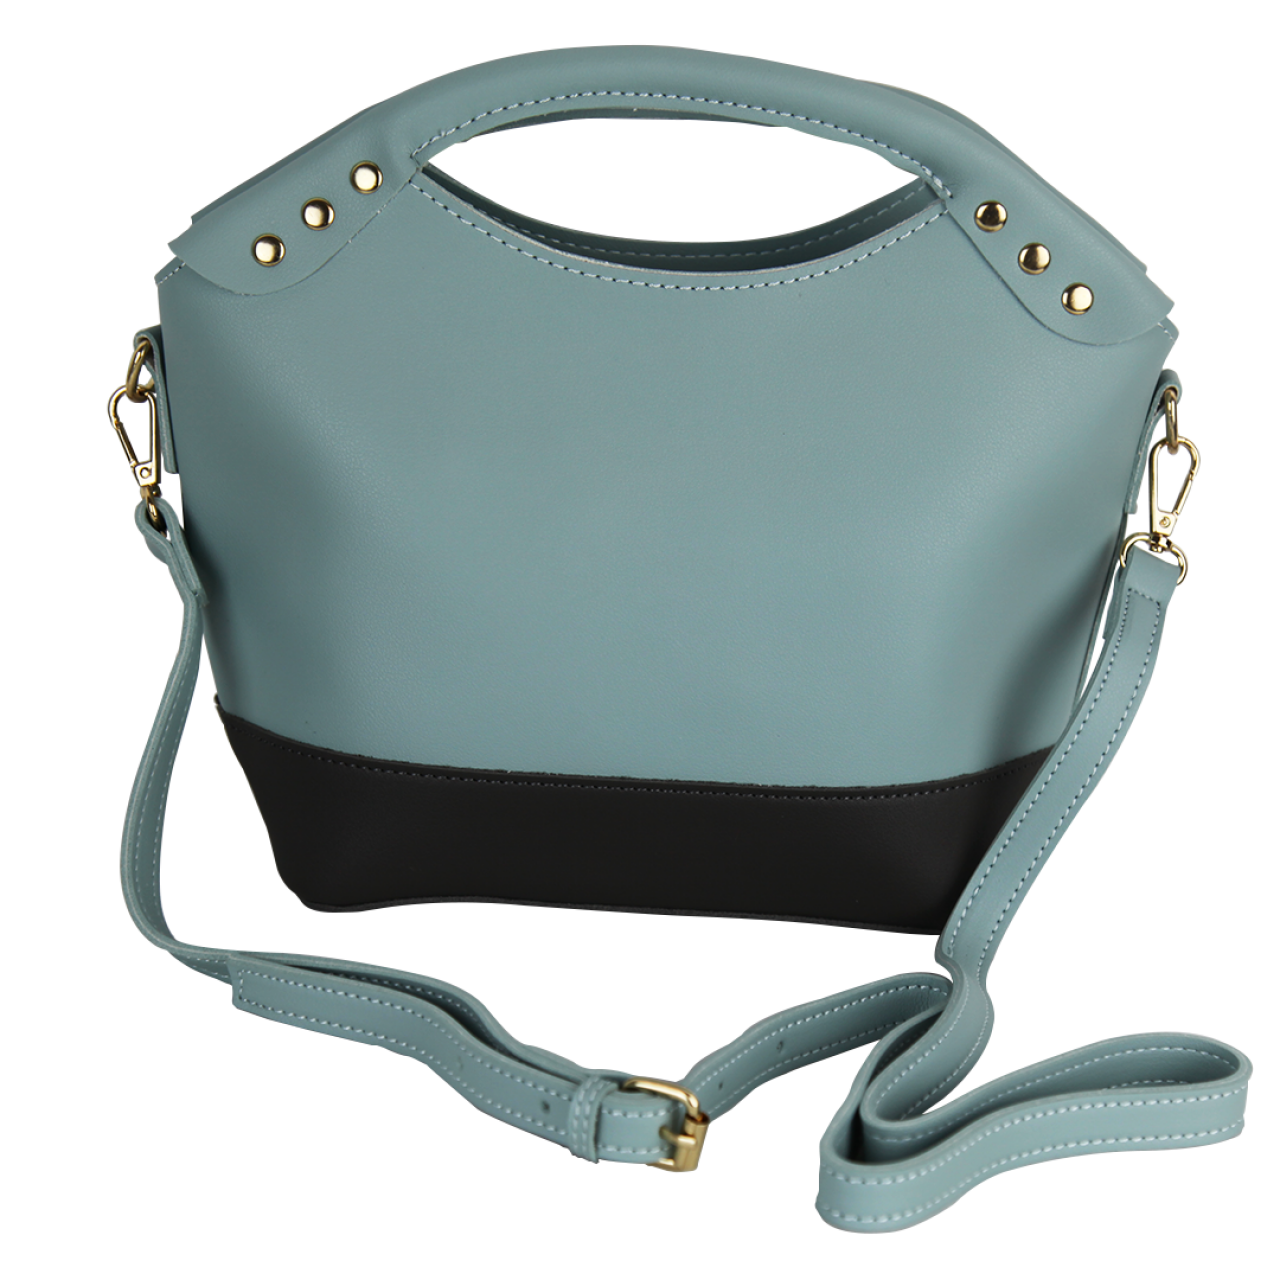 Women's Top Handle Classy Stylish Multicolor Green/Brown/Blue Clutch With Adjustable Leather Straps Bag